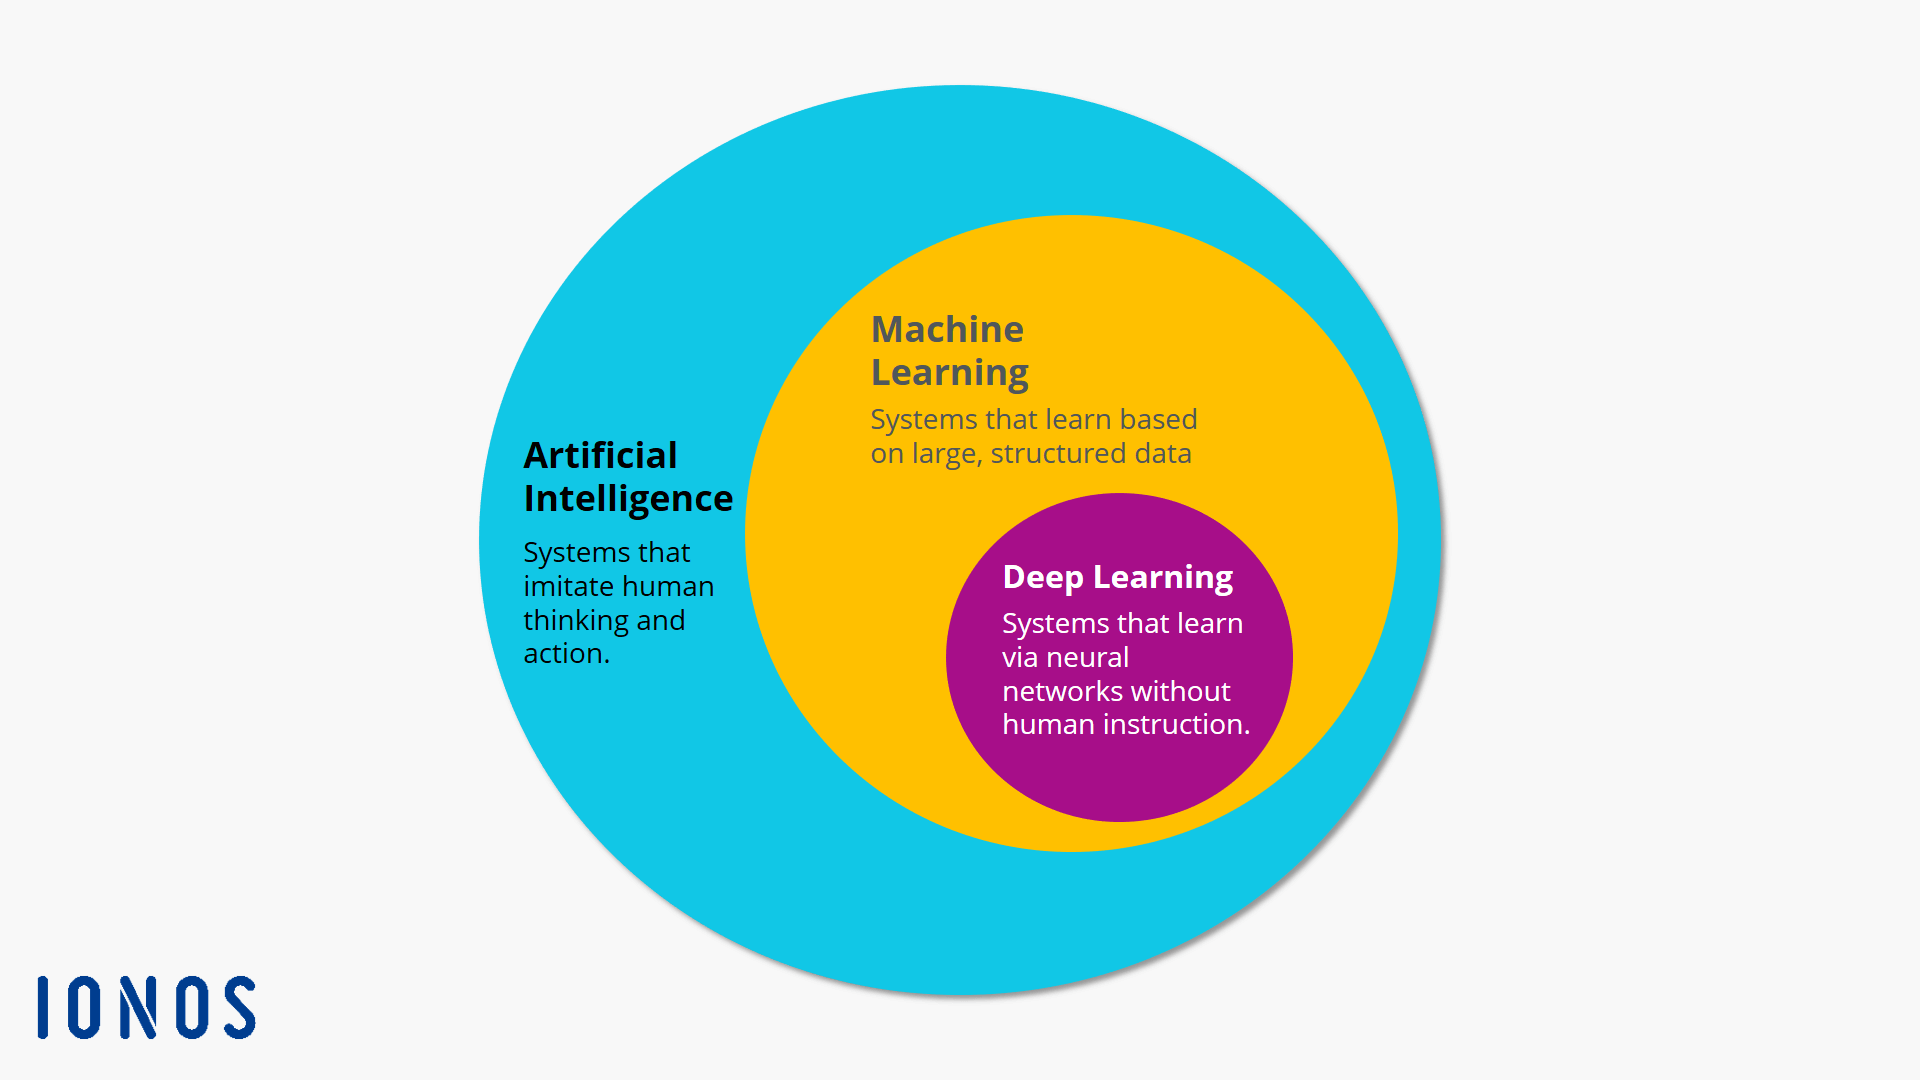 A pie chart representing machine learning and deep learning as subsections of artificial intelligence